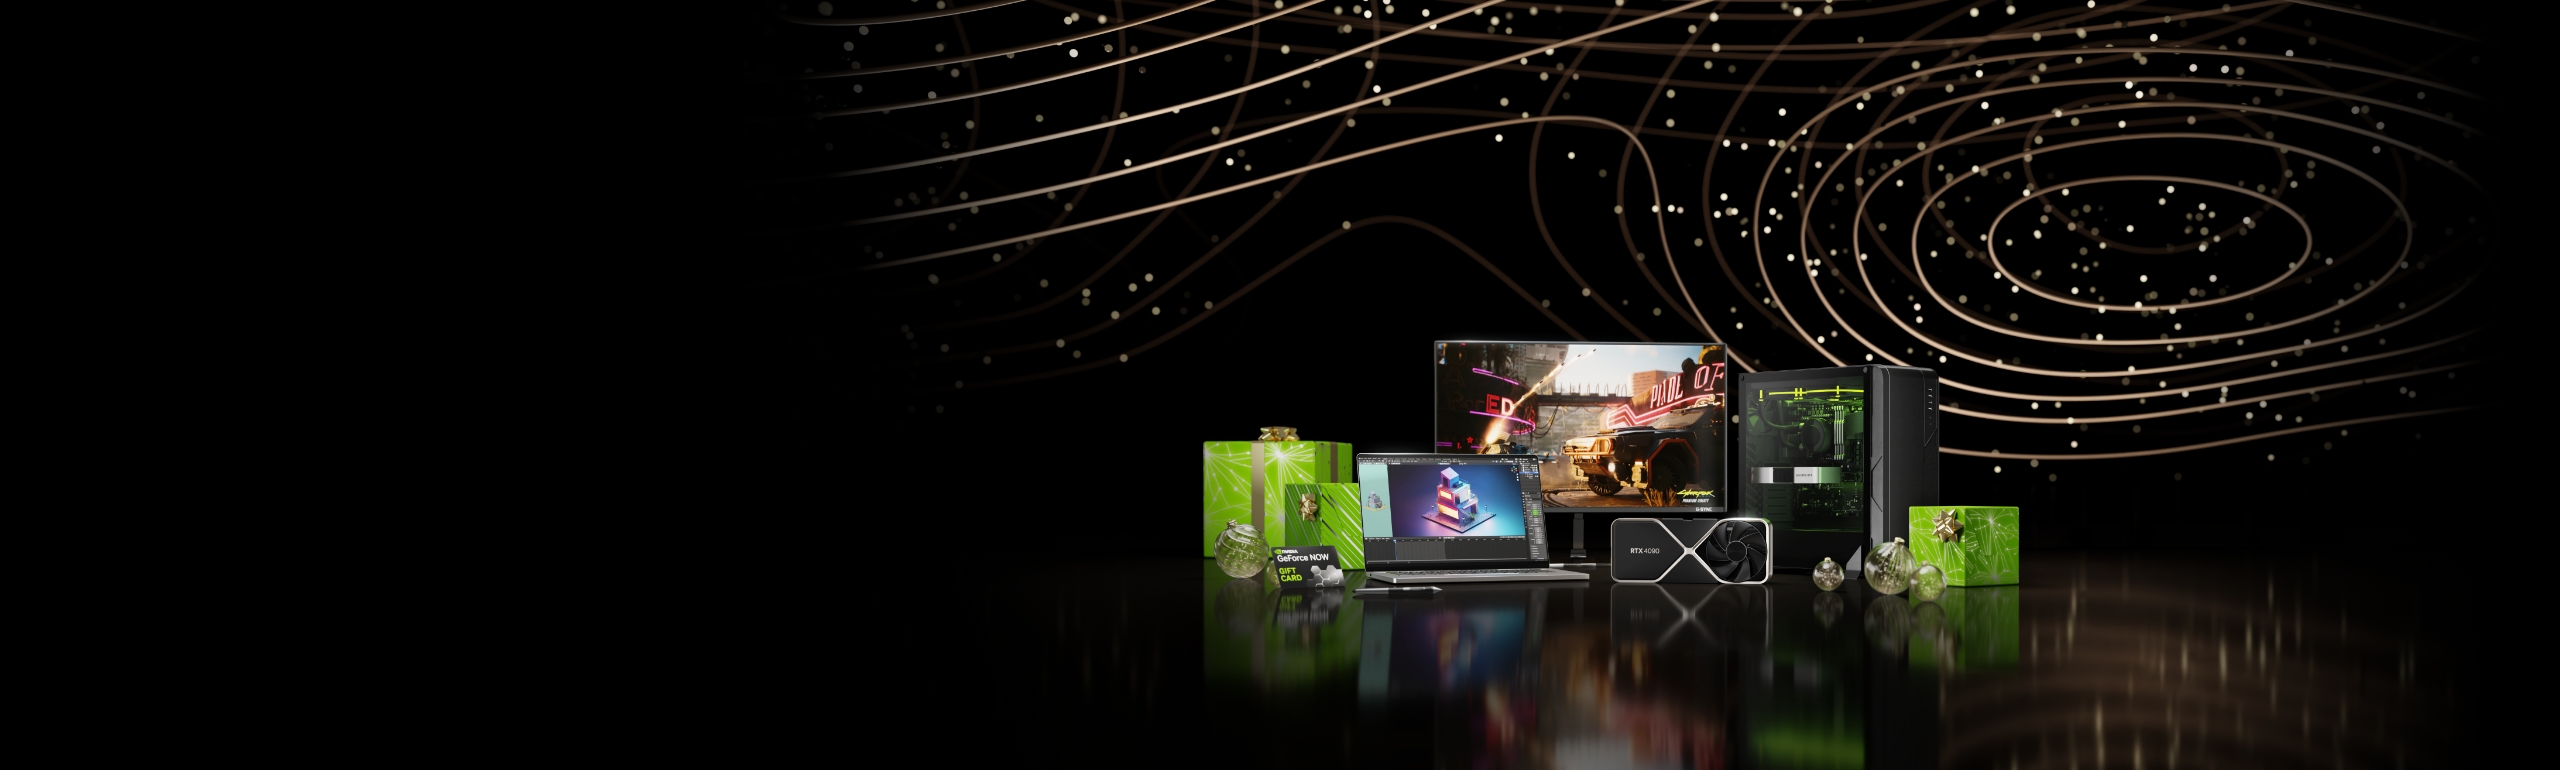 Holiday Deals: GeForce Graphics Cards, Laptops & More